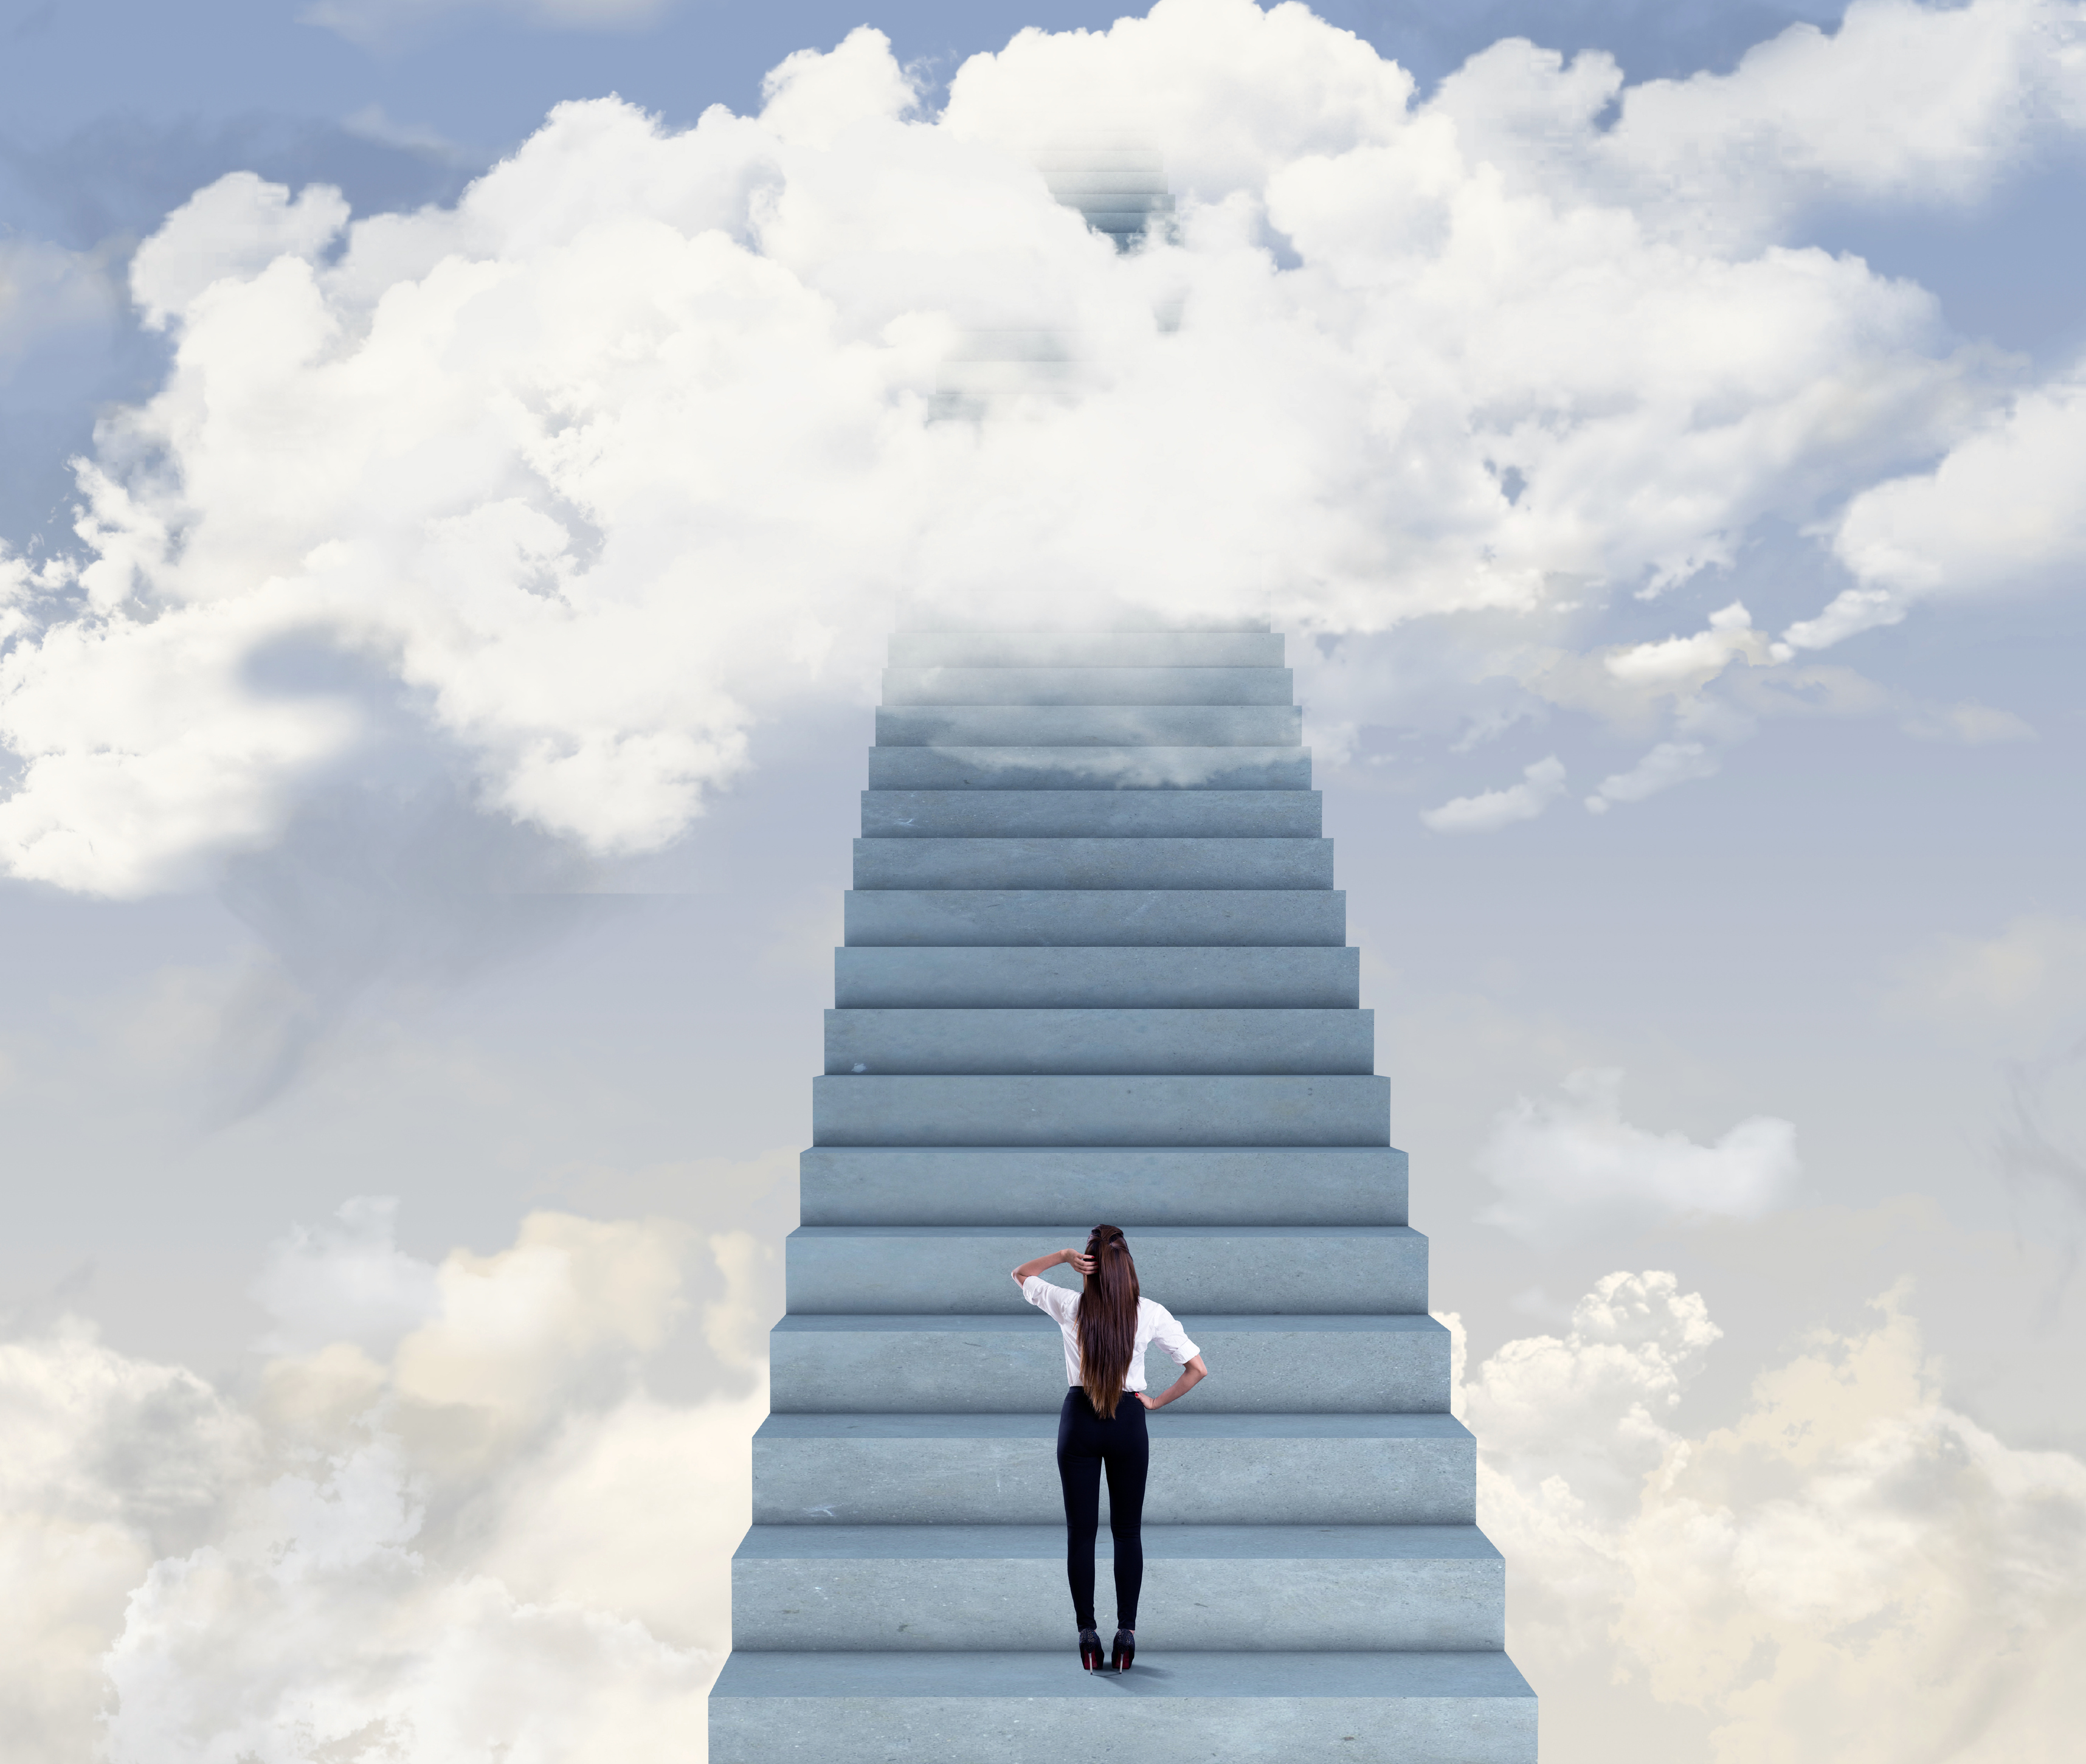 Woman at bottom of stairs looking up into clouds